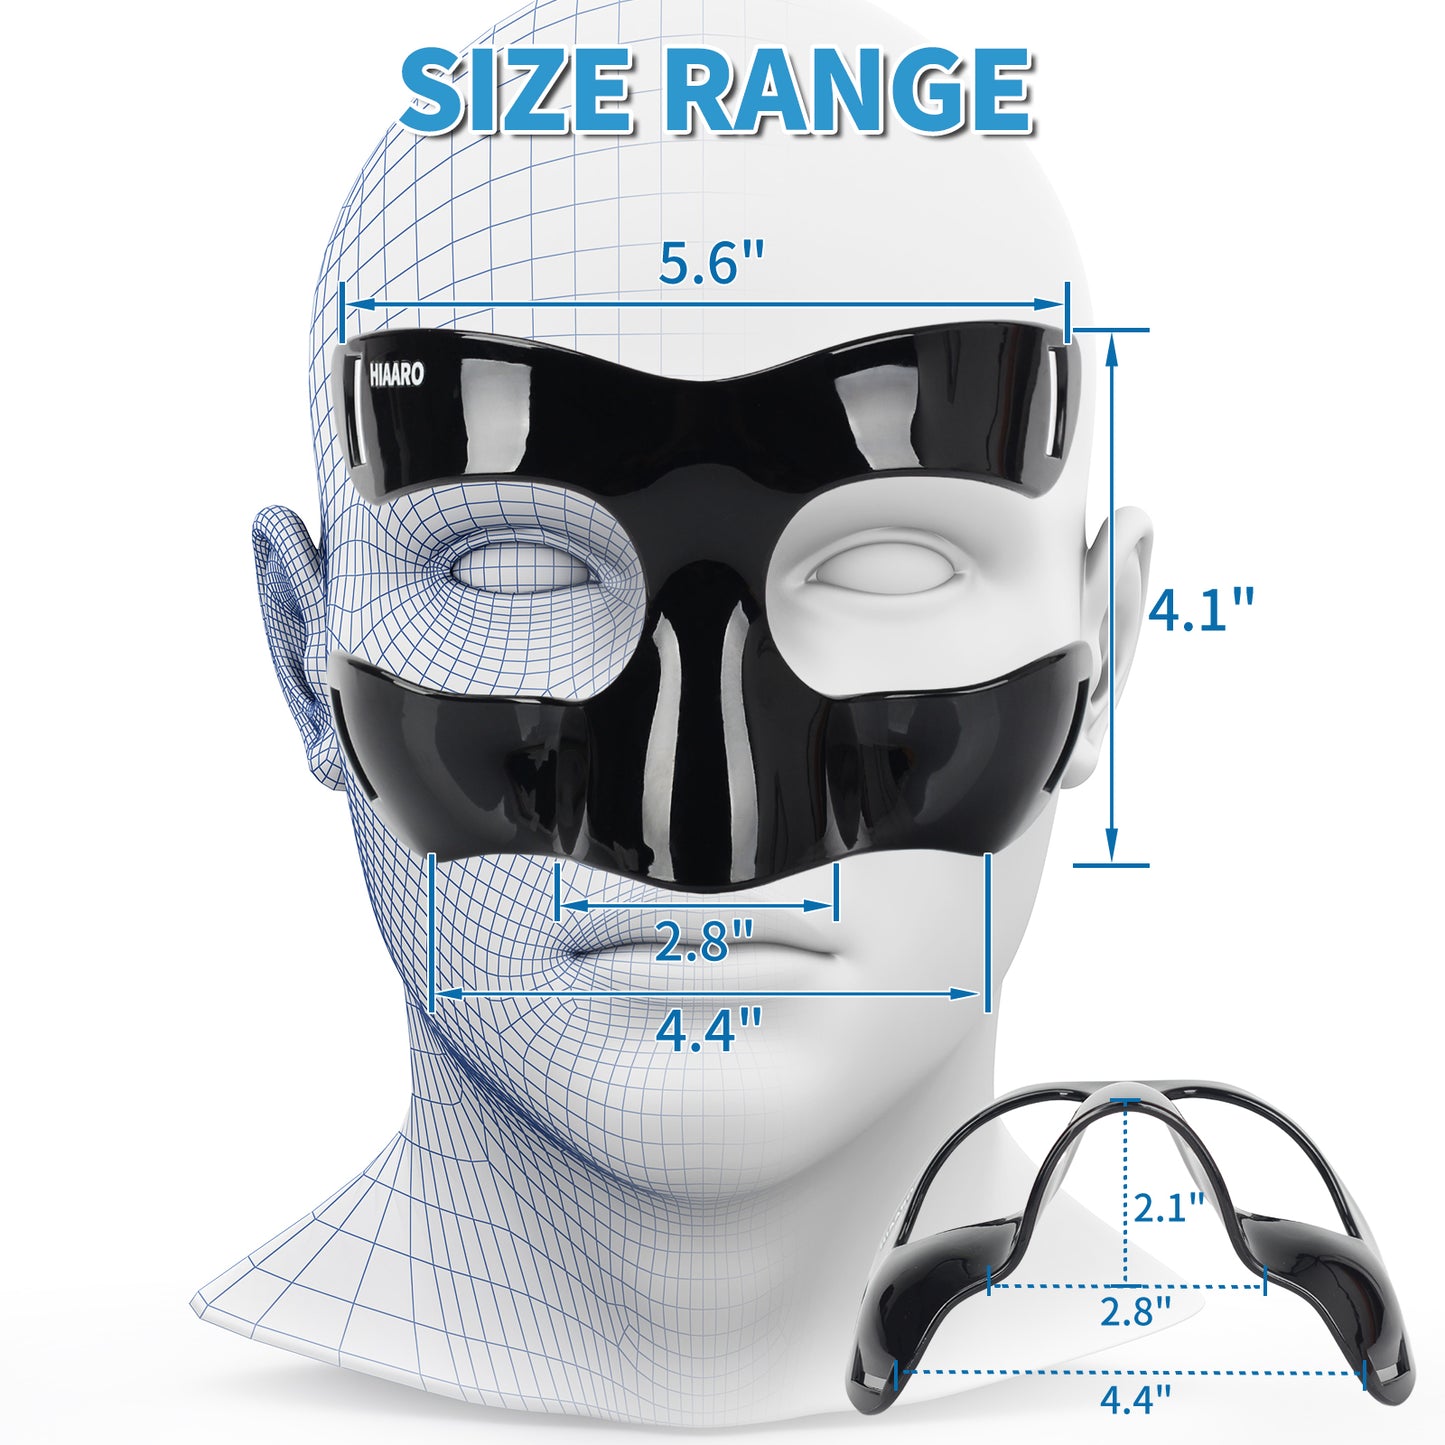 Nose Guard for Broken Nose, Sports Face Shield Masks with Padding, Black